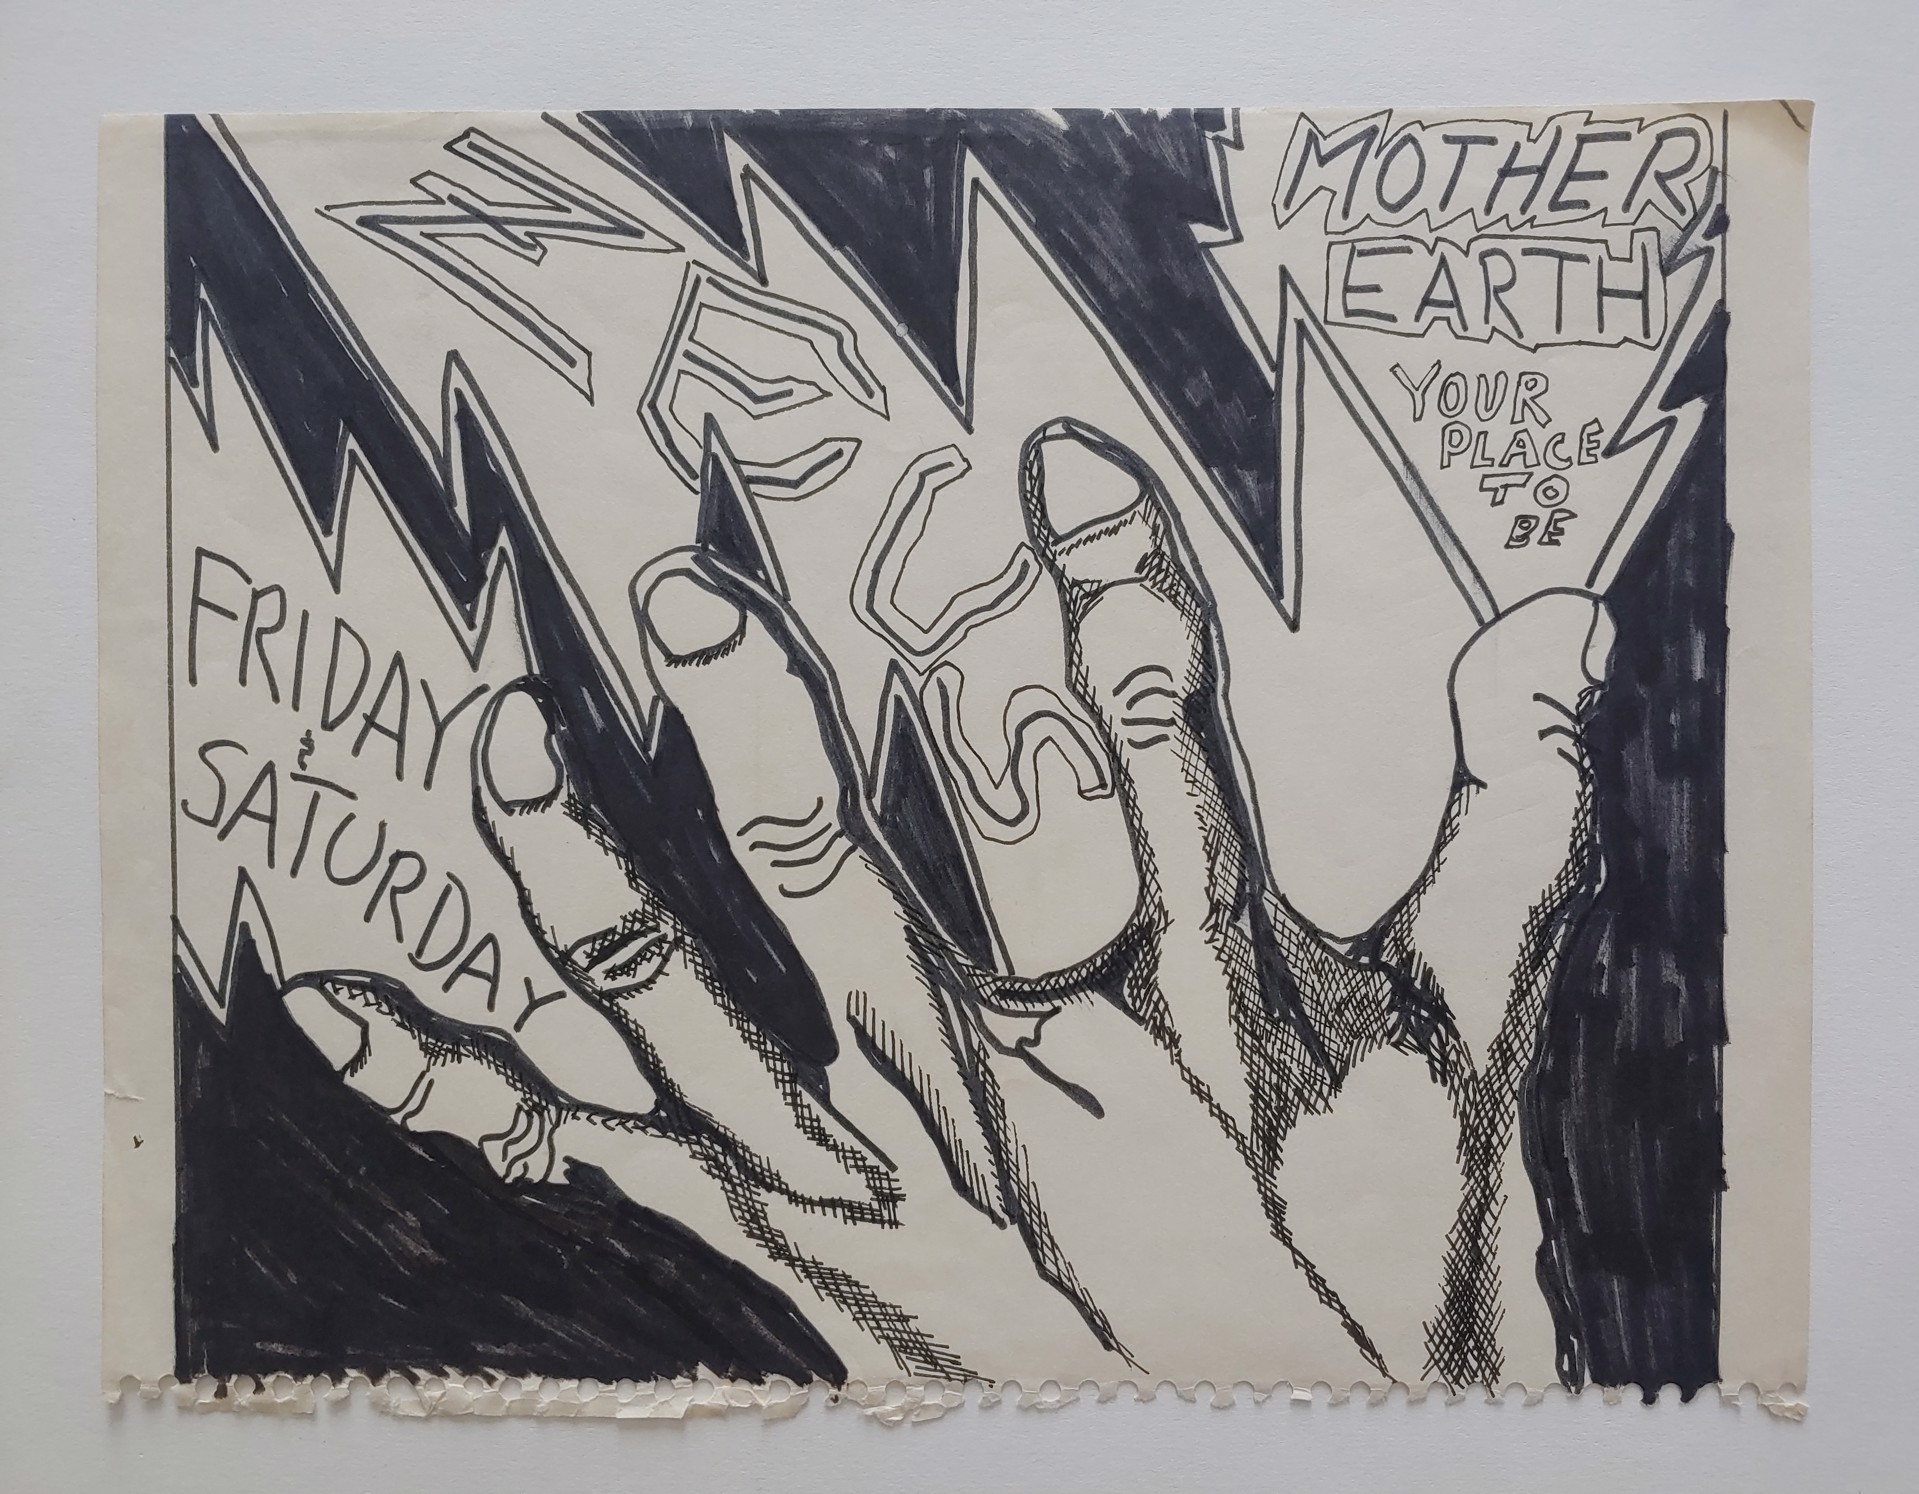 Zeus/Mother Earth Poster - Original Drawing by David Amdur